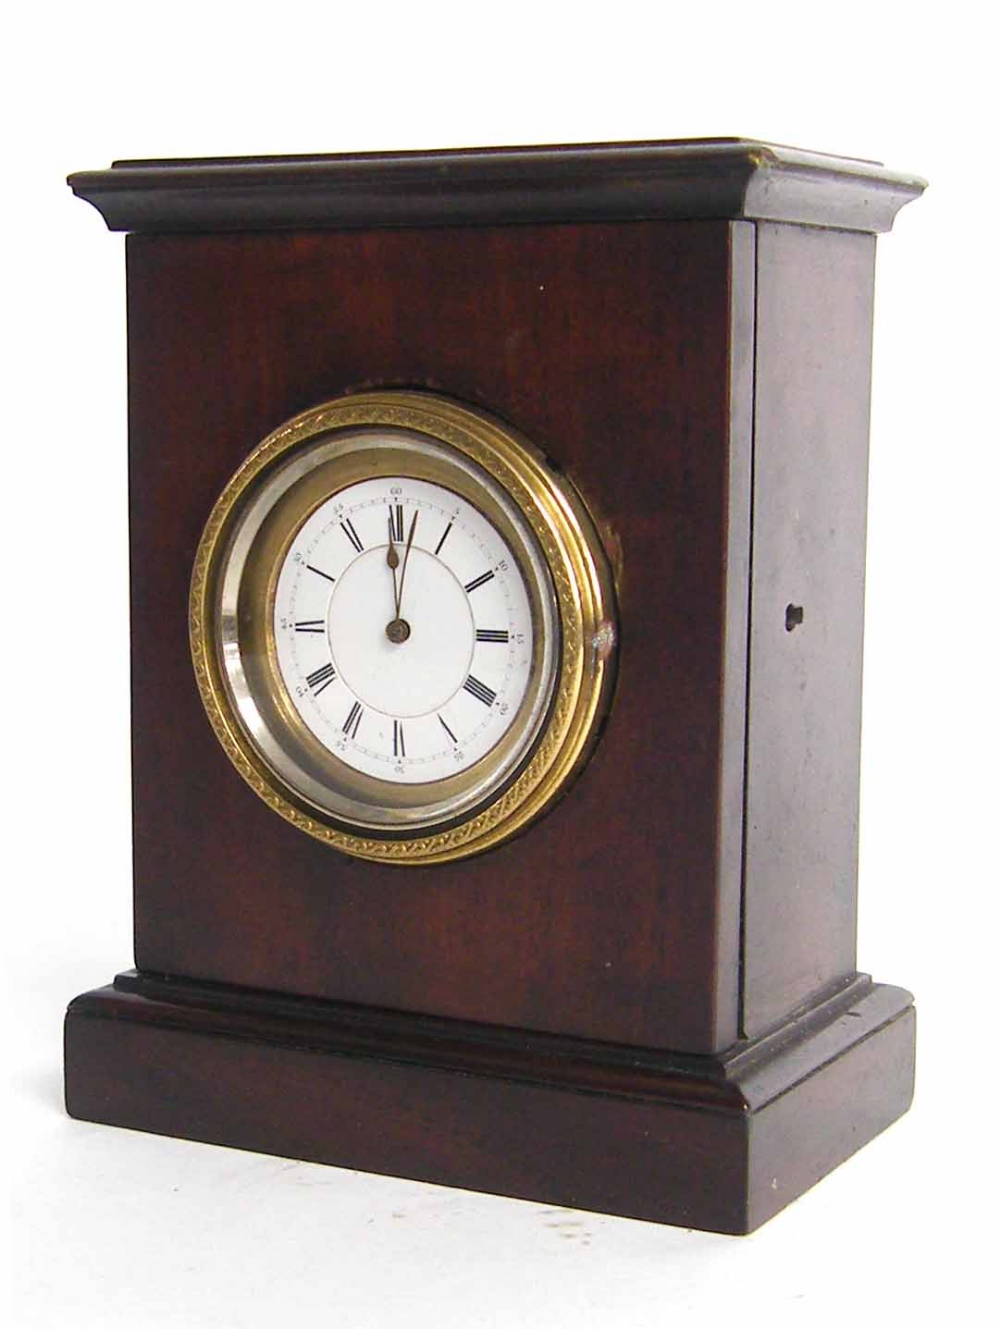 Small French mahogany mantel clock timepiece with platform escapement, the 1.75" white dial within a